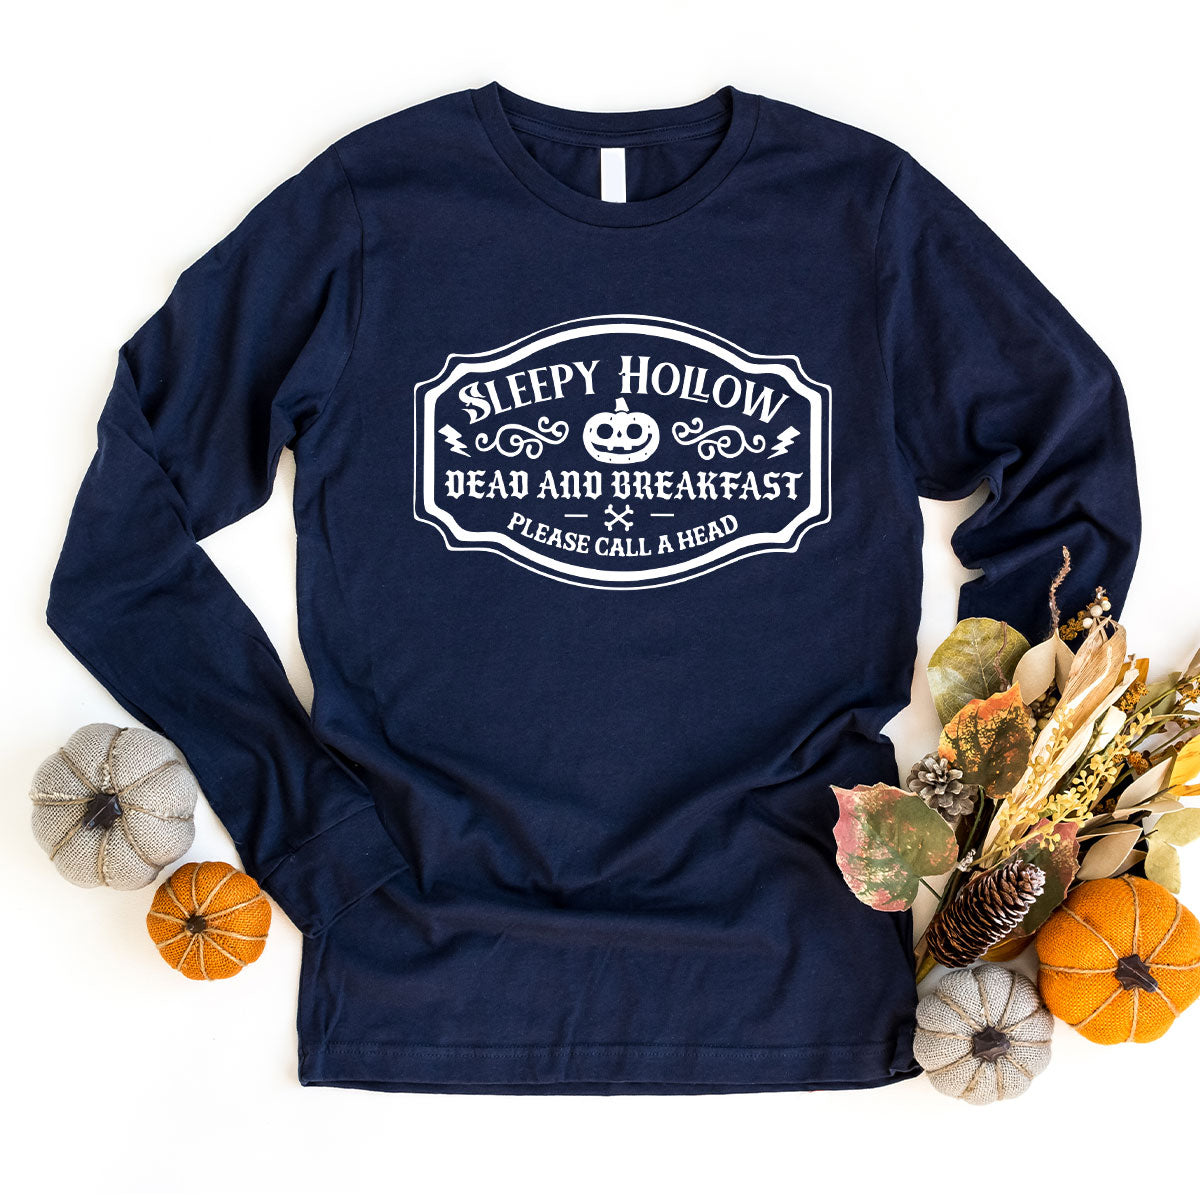 Halloween Sweatshirt, Pumpkin Graphic Tees, Funny Farmer Outfit, Gift for Her, Spooky Season Clothes, Cool Movie VNeck Shirt, Horror T-Shirt